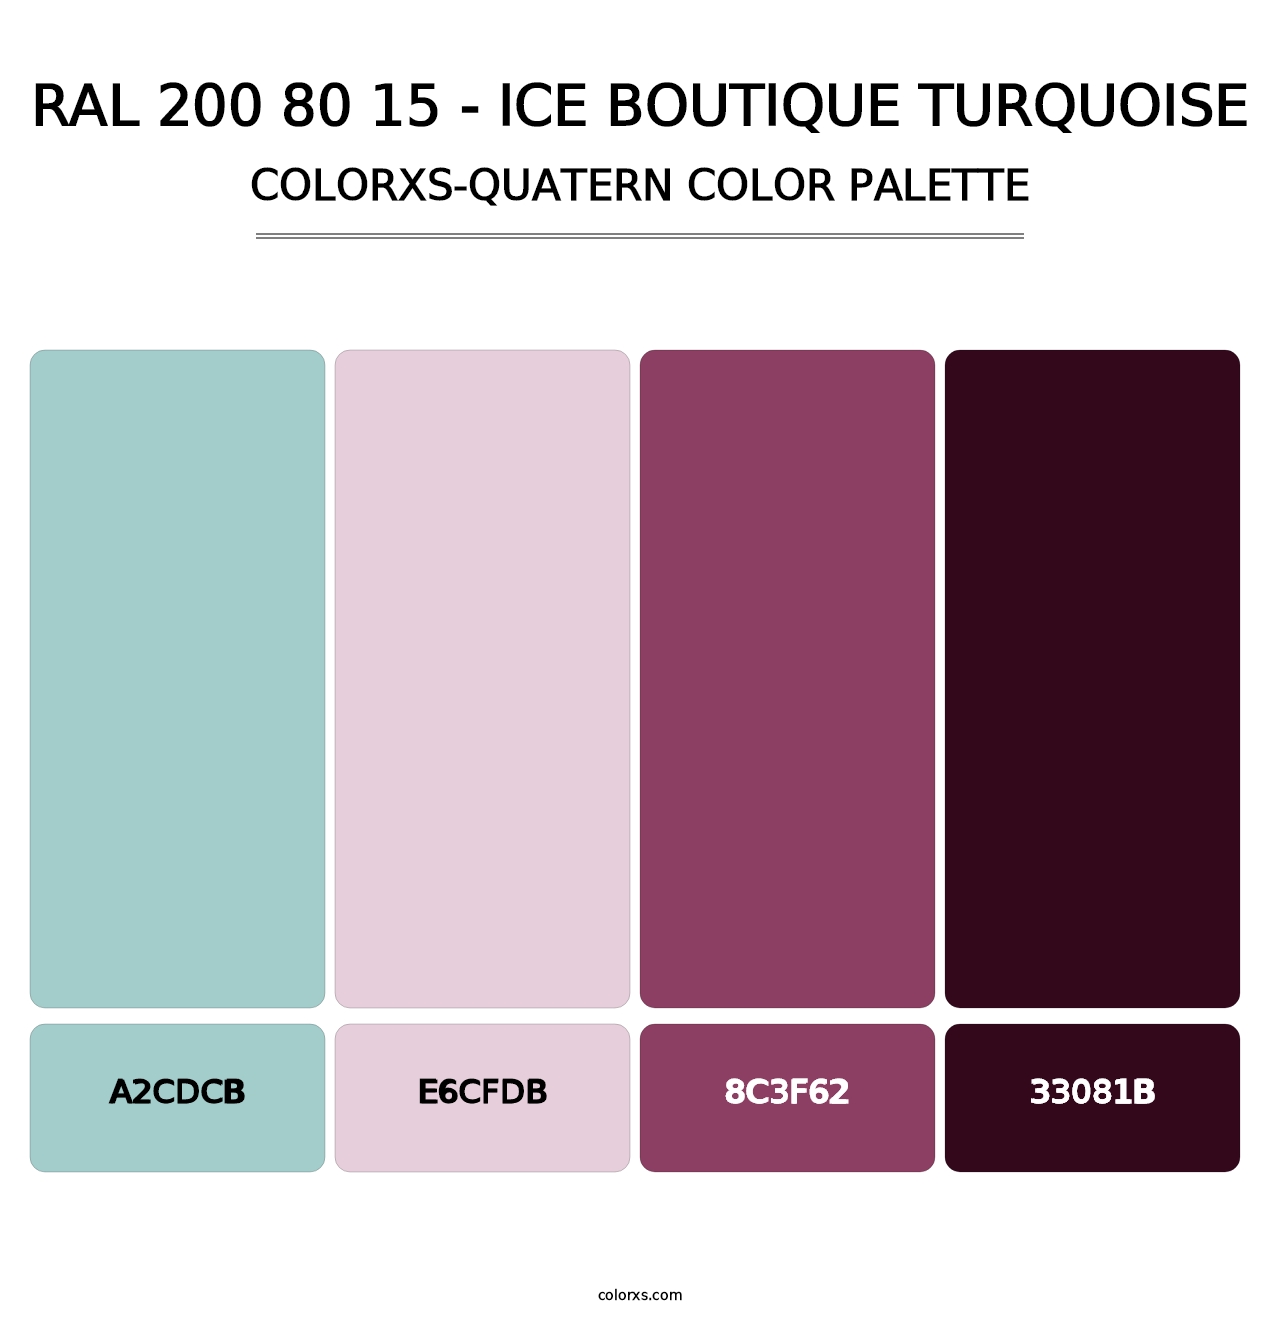 RAL 200 80 15 - Ice Boutique Turquoise - Colorxs Quatern Palette